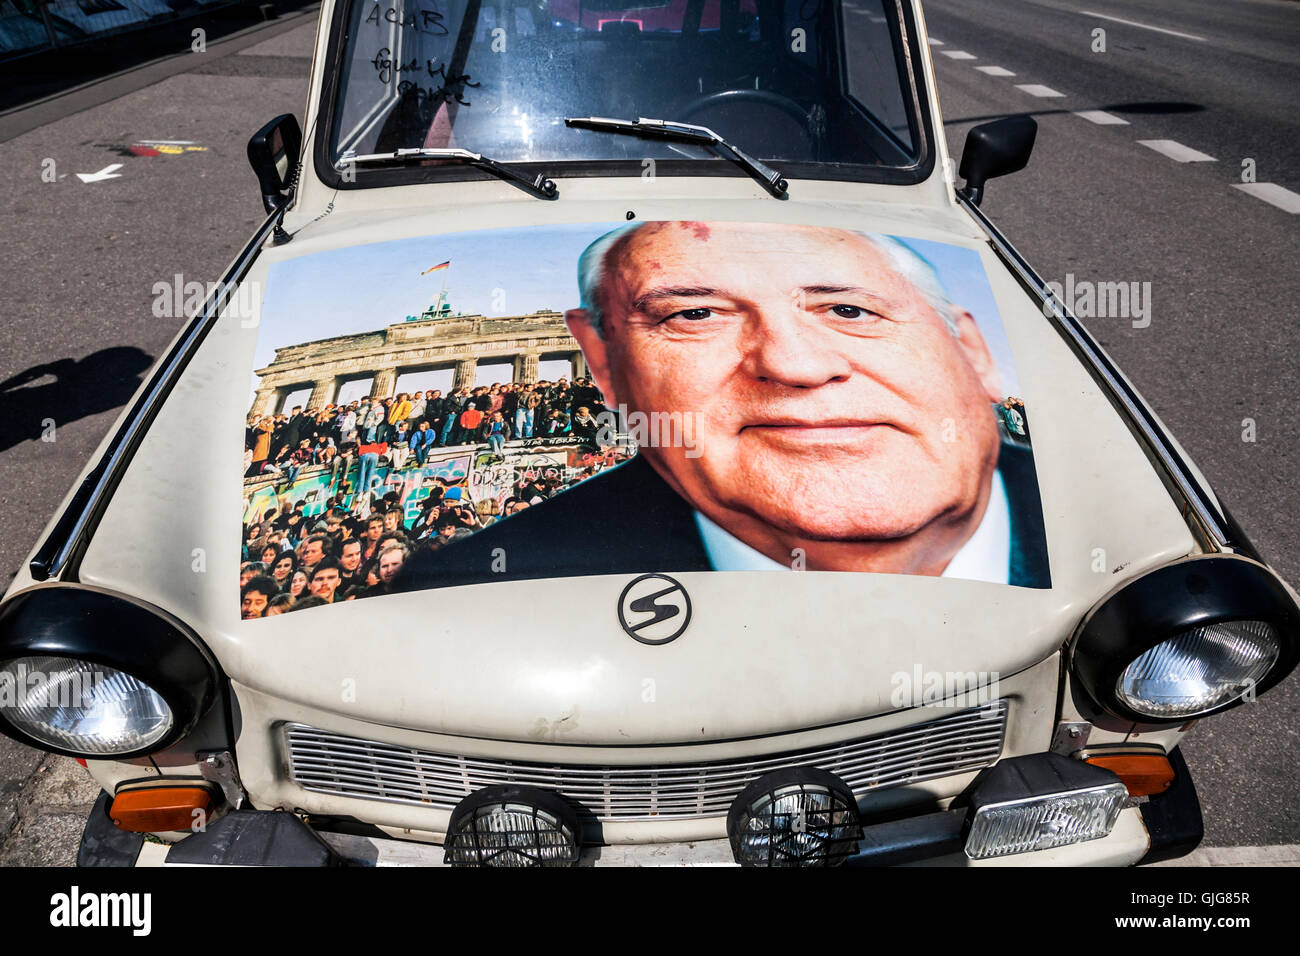 Detail of an old Trabant car with an image of Mikhail Gorbachev and the fall of the Berlin wall on the bonnet, Berlin, Germany. Stock Photo